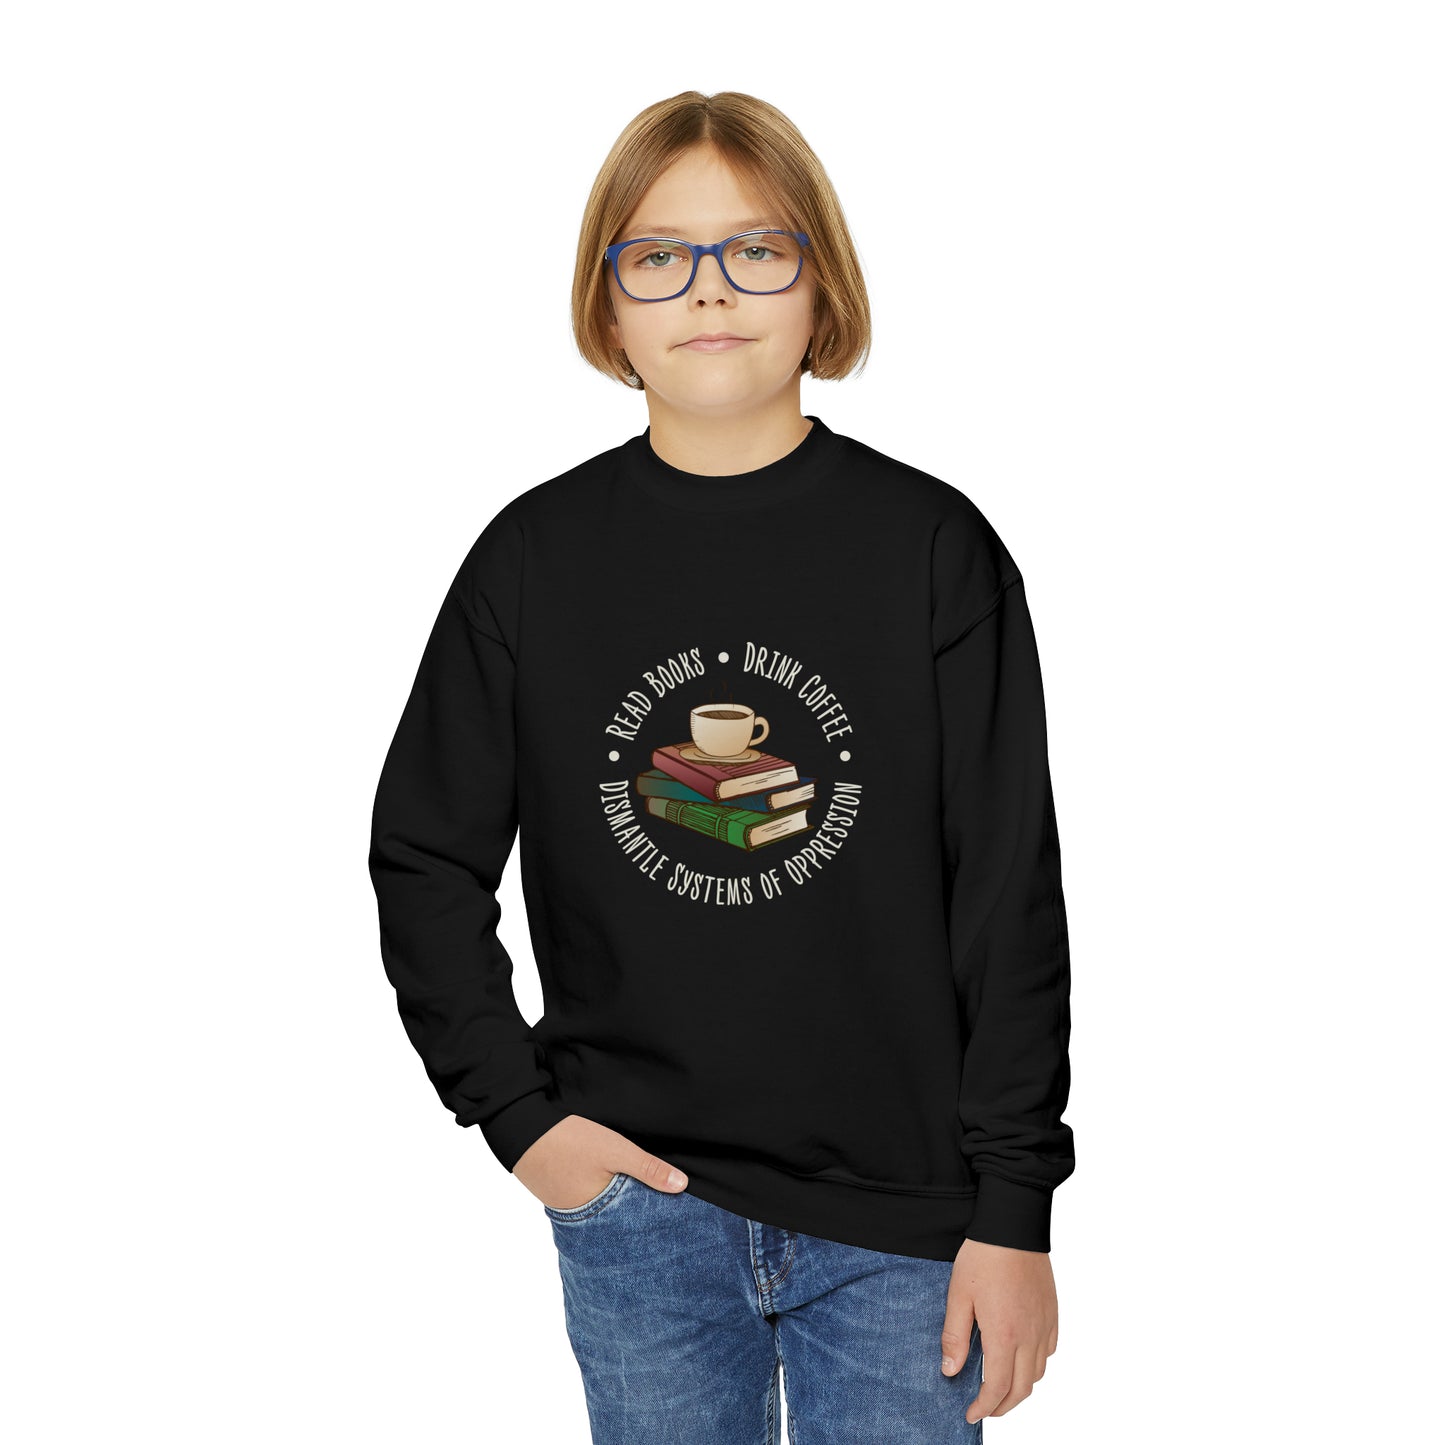 “Dismantle Systems of Oppression” Youth Sweatshirt